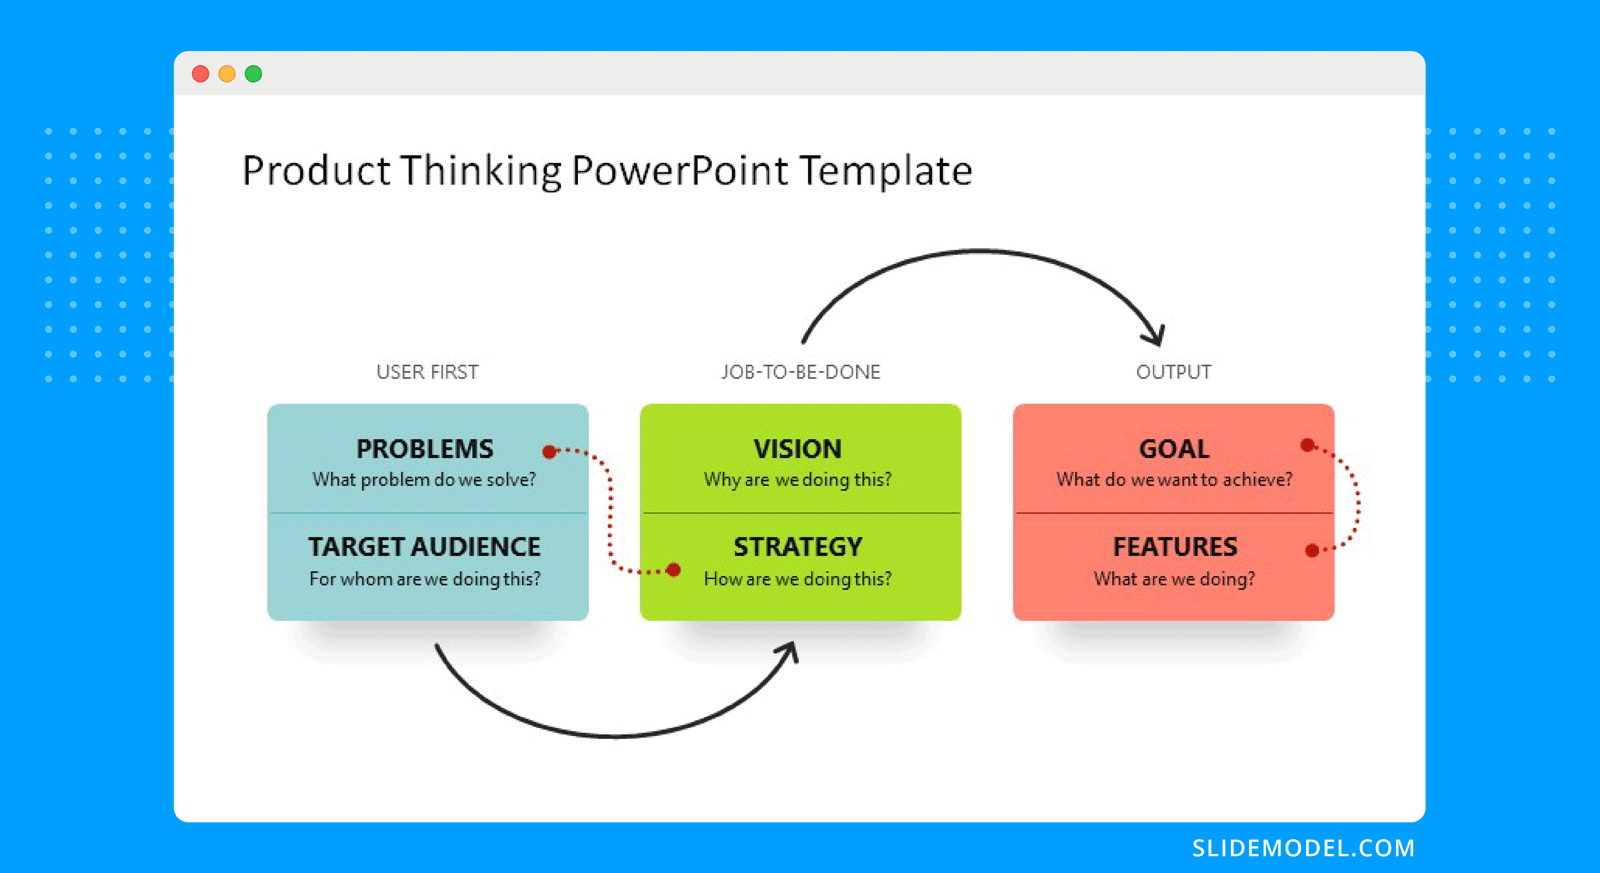 slide showing a Product Thinking PowerPoint template